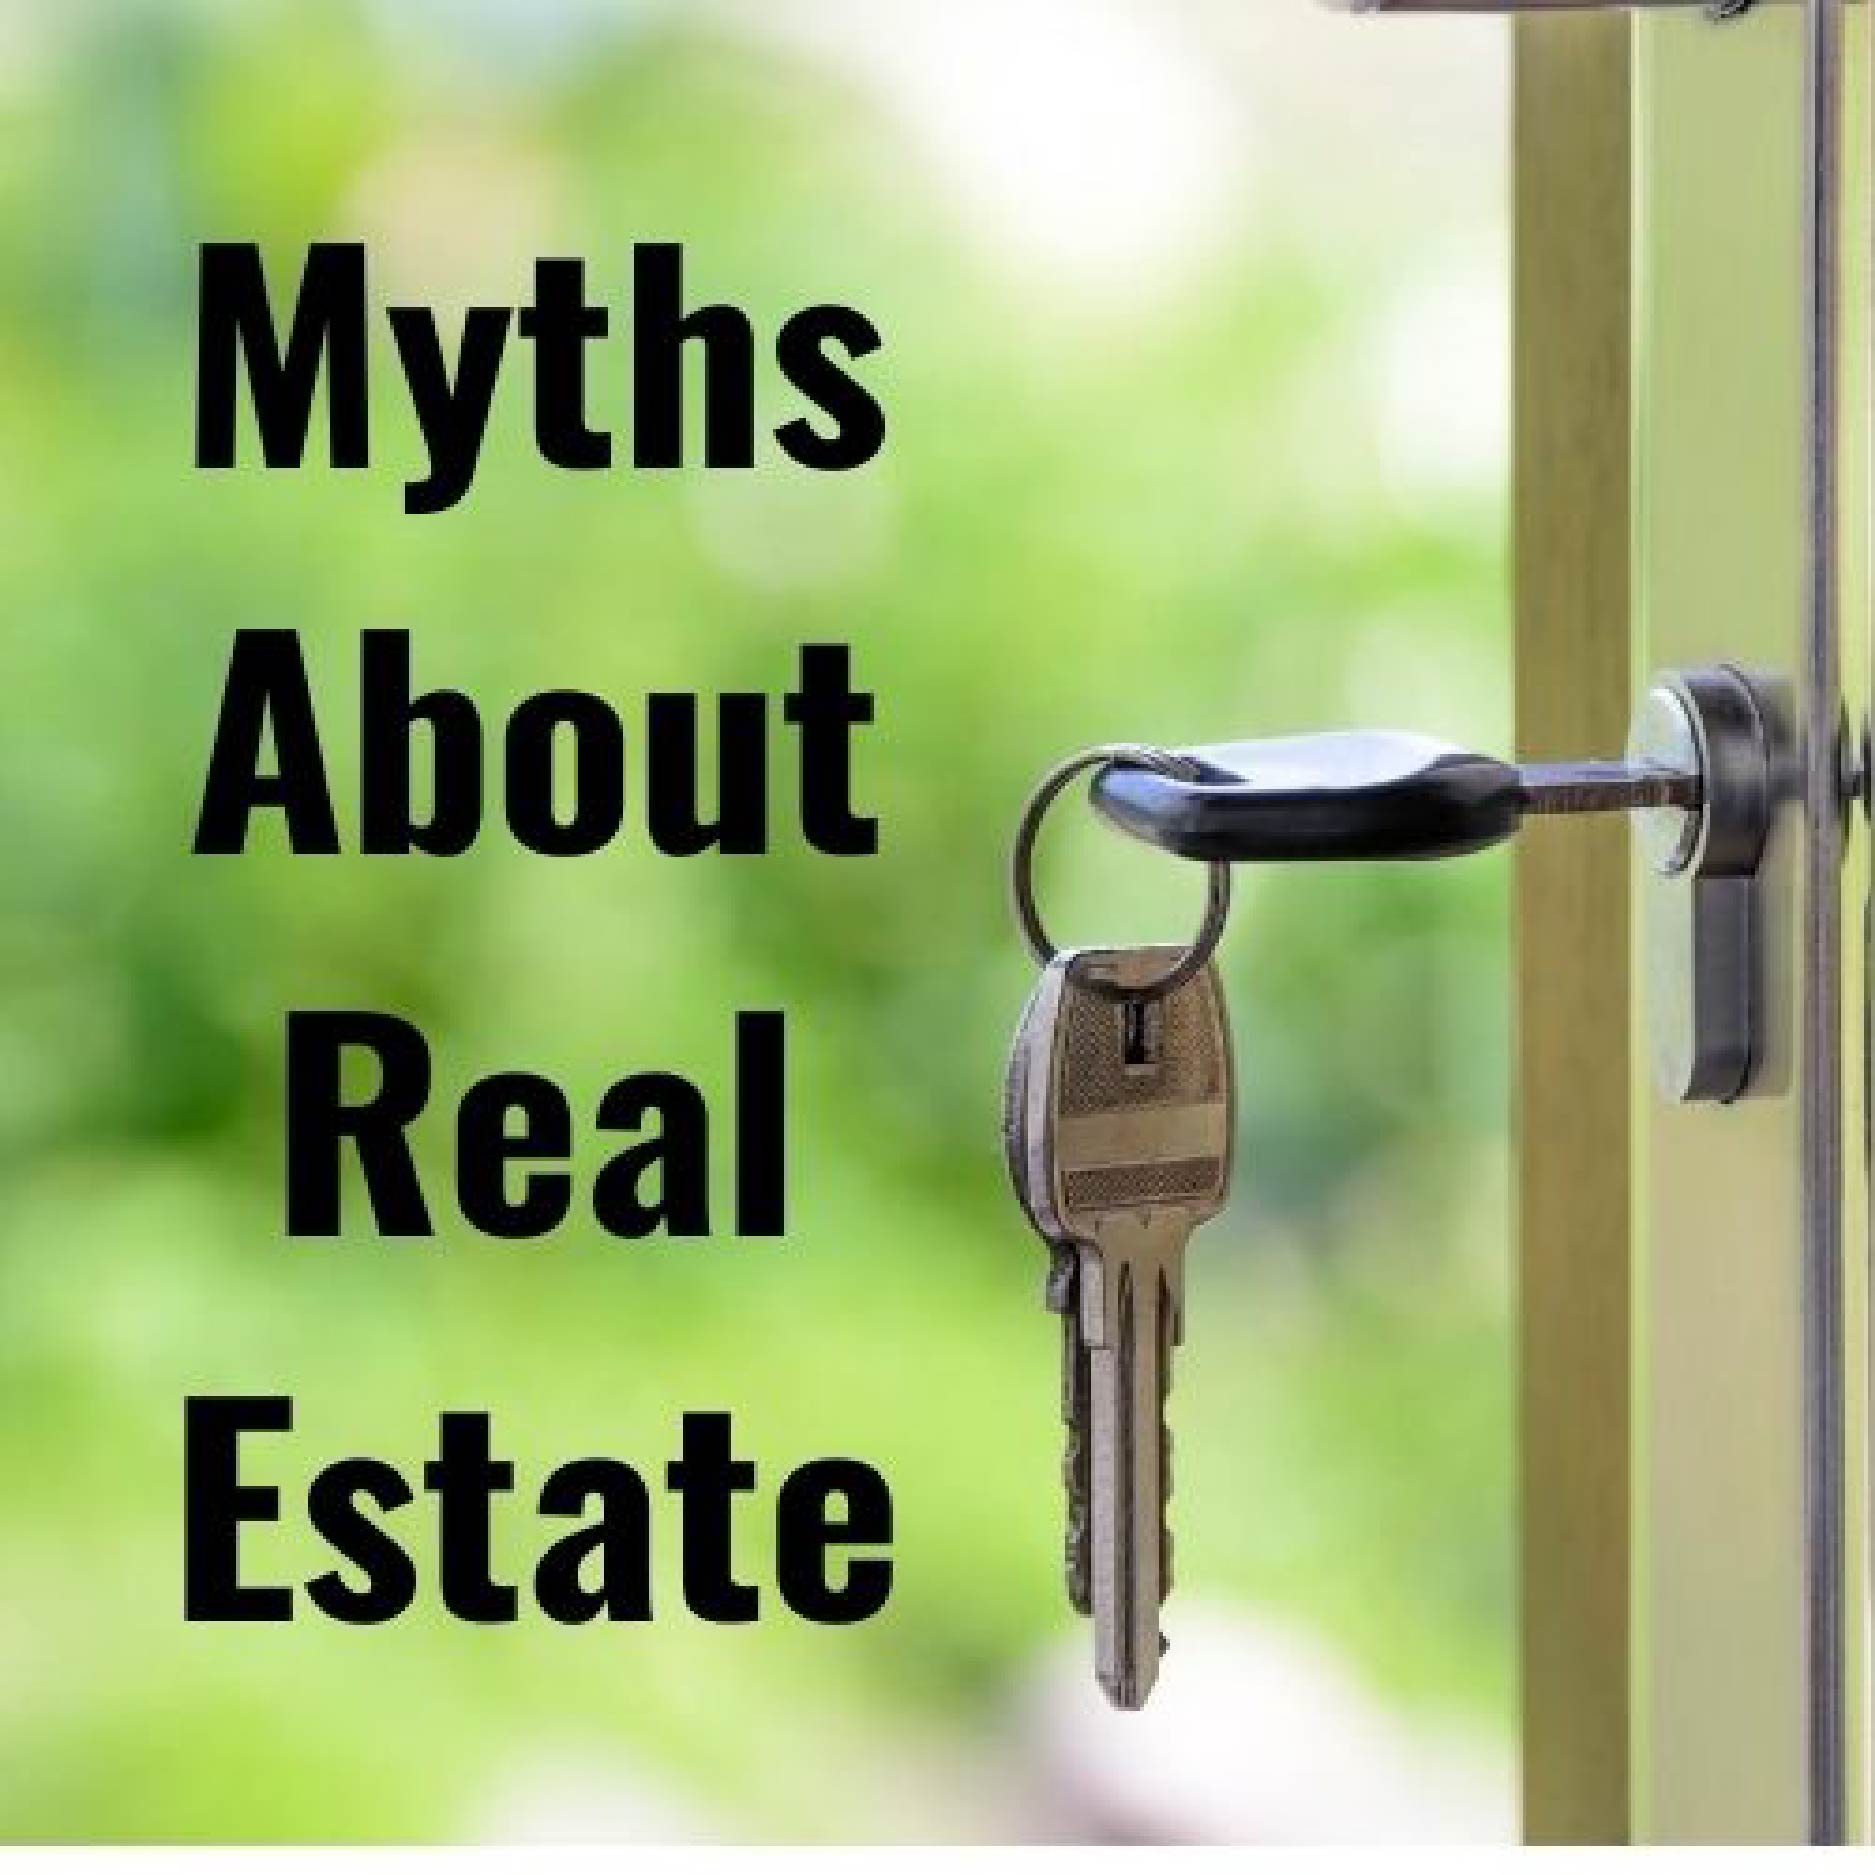 MYTHS ABOUT REAL ESTATE